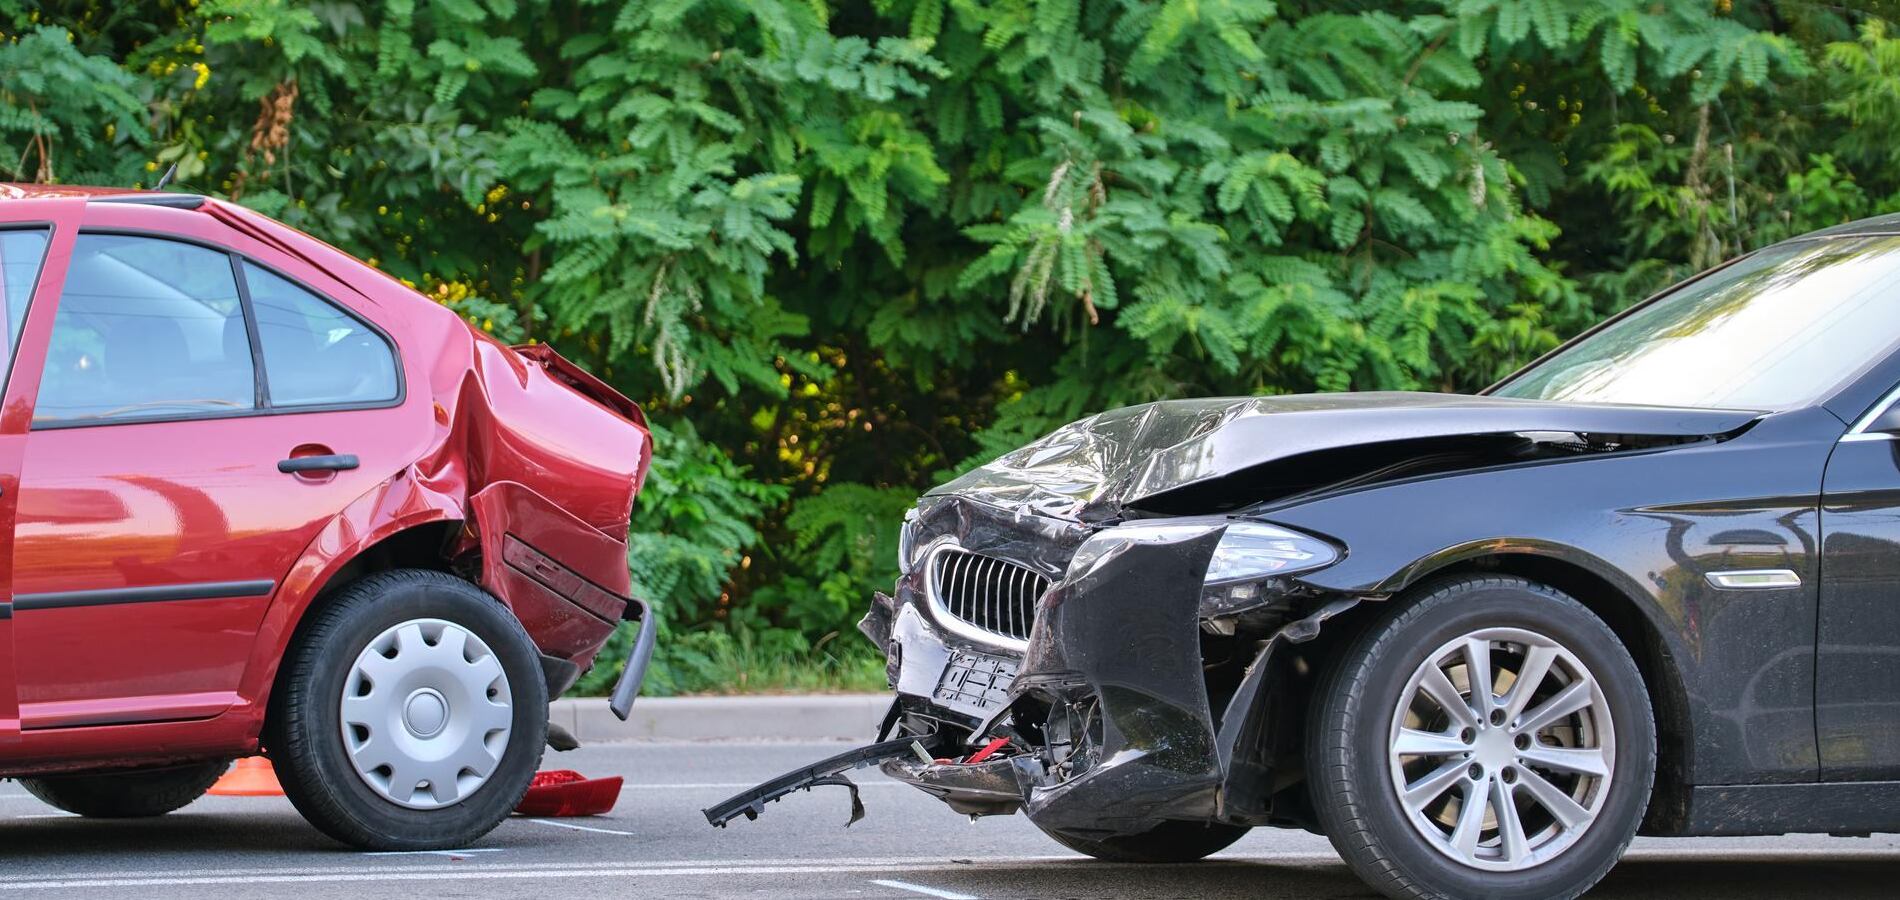 Car Accident Lawyer in Brea, CA